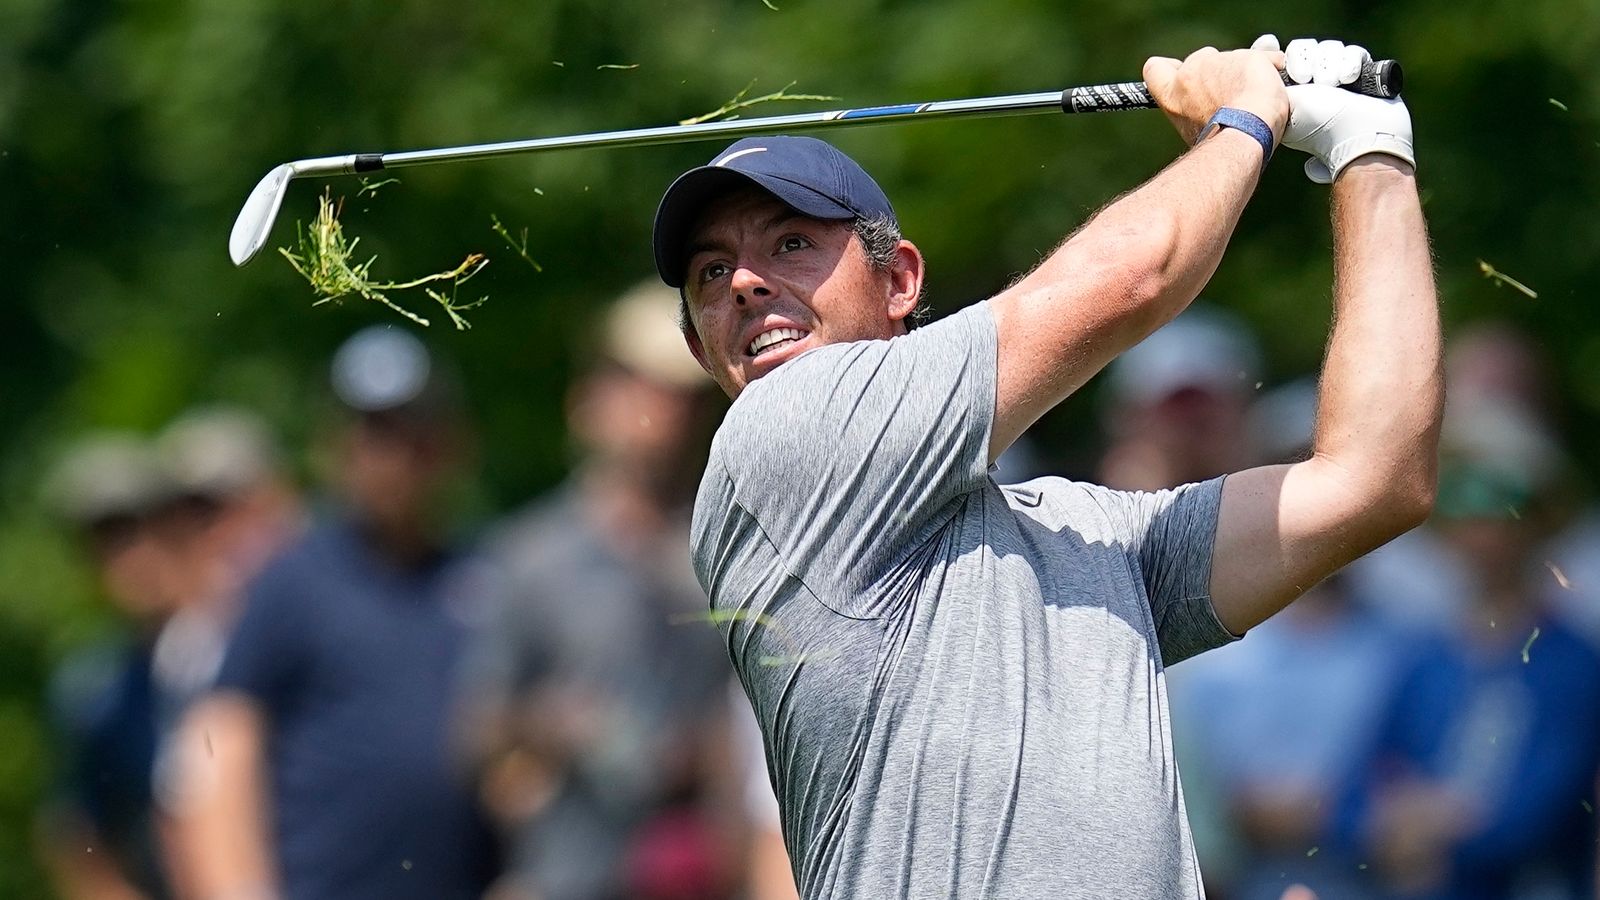 McIlroy in share of lead at Memorial tournament | 'I’m battling!'